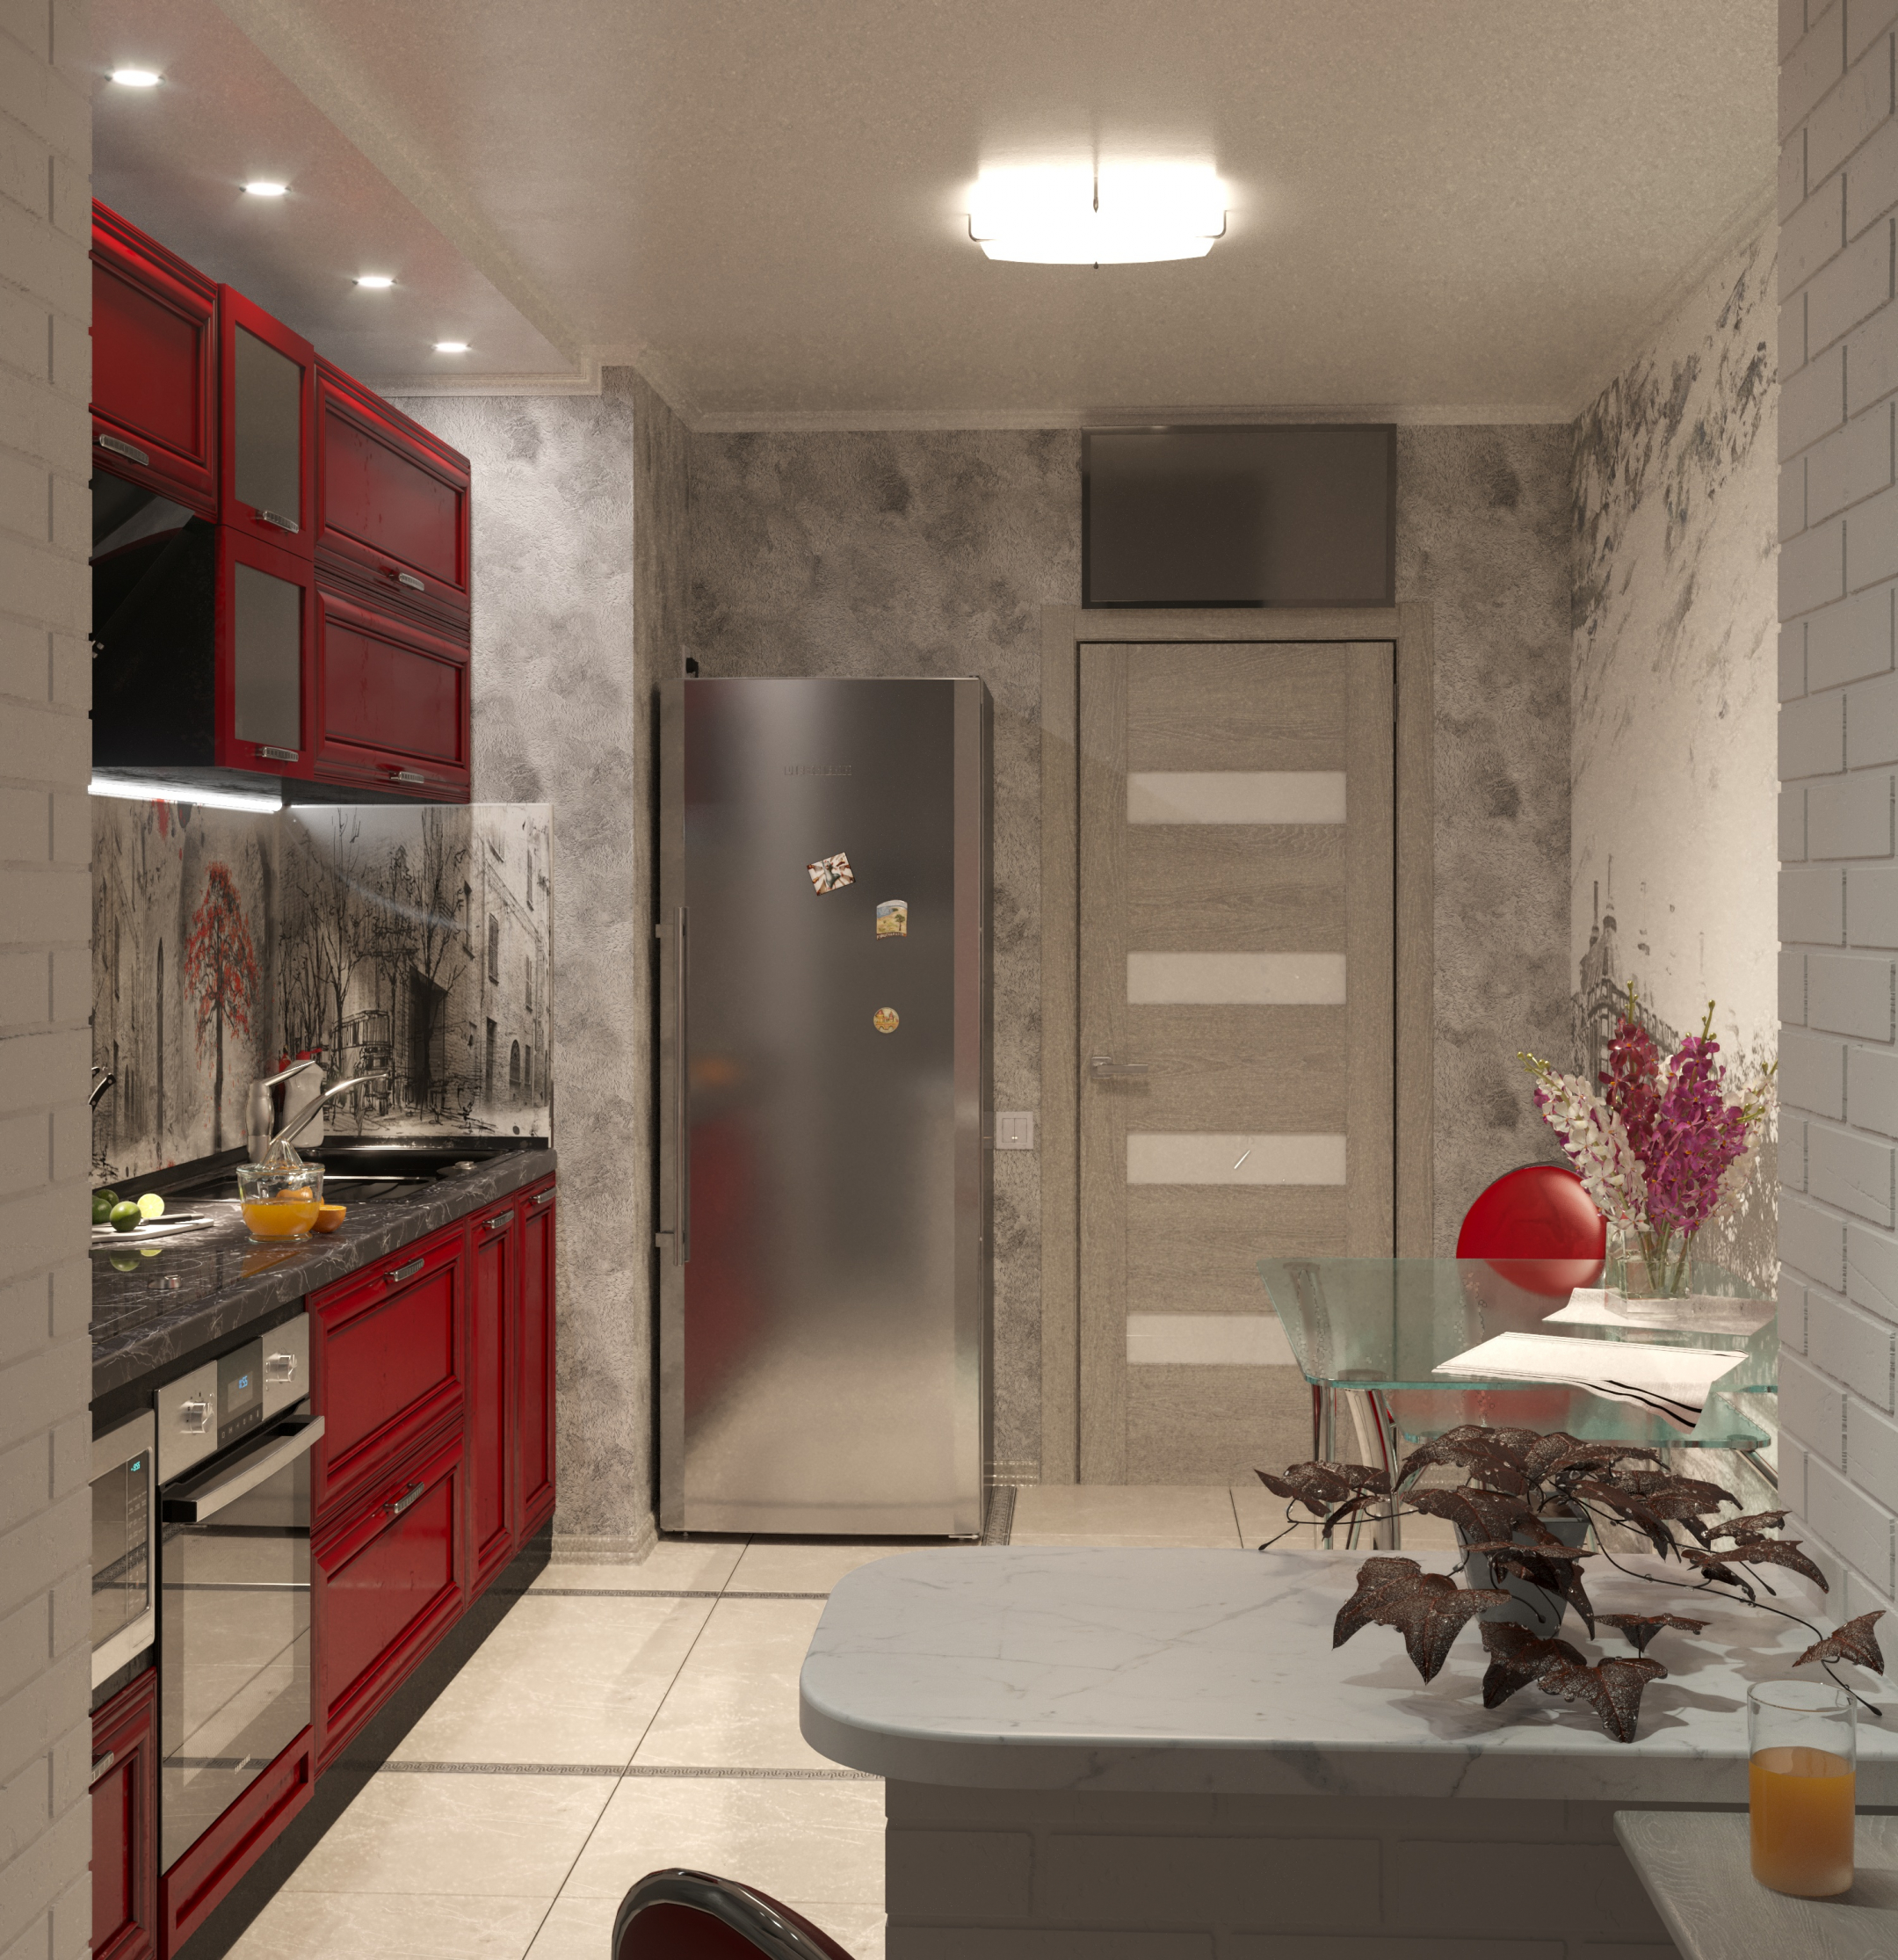 two-room kitchen in 3d max corona render image